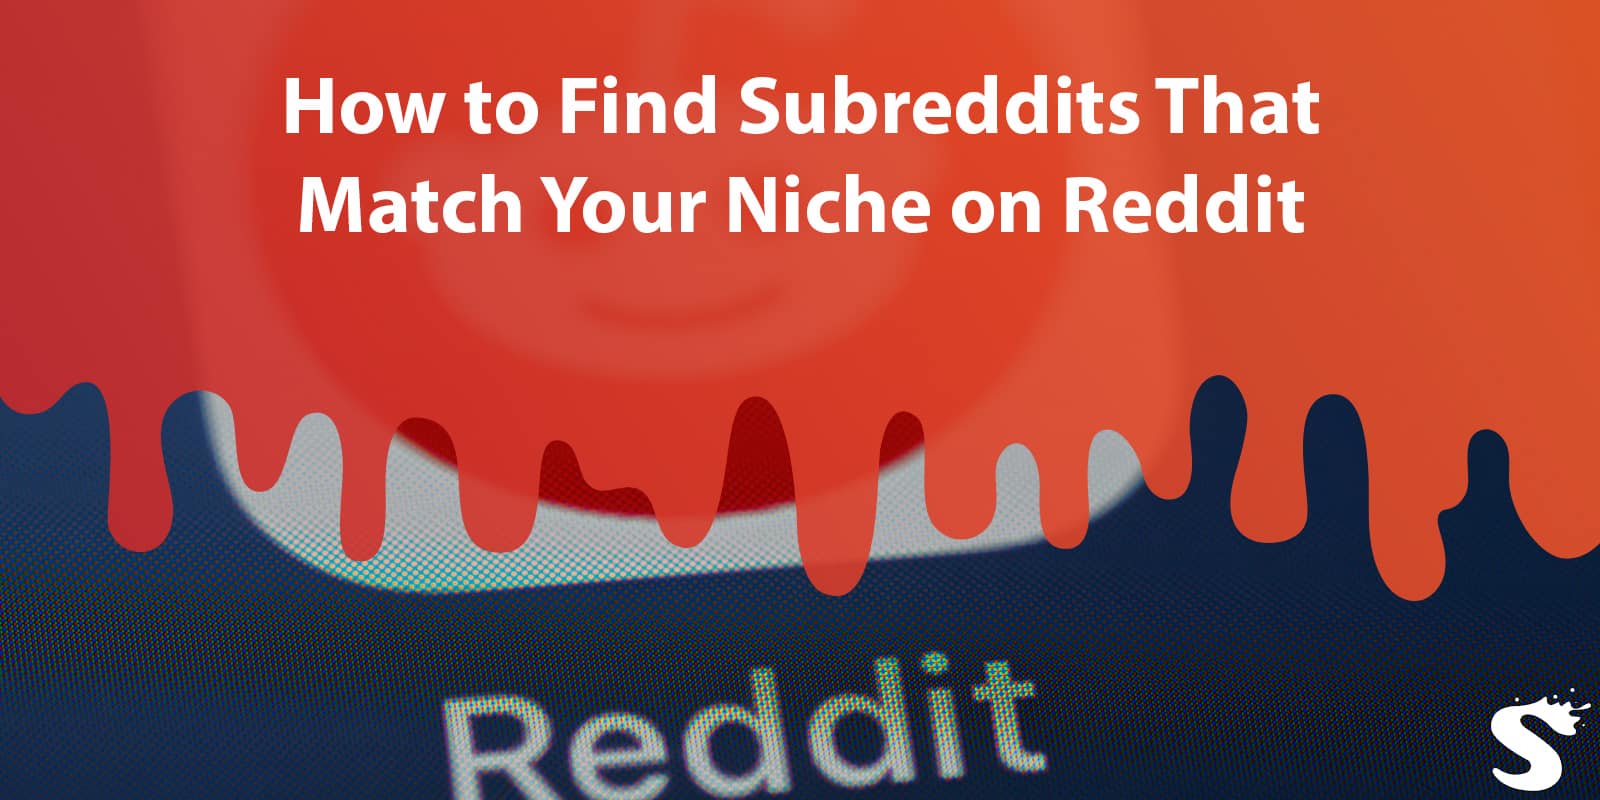 How to Find Subreddits That Match Your Niche on Reddit